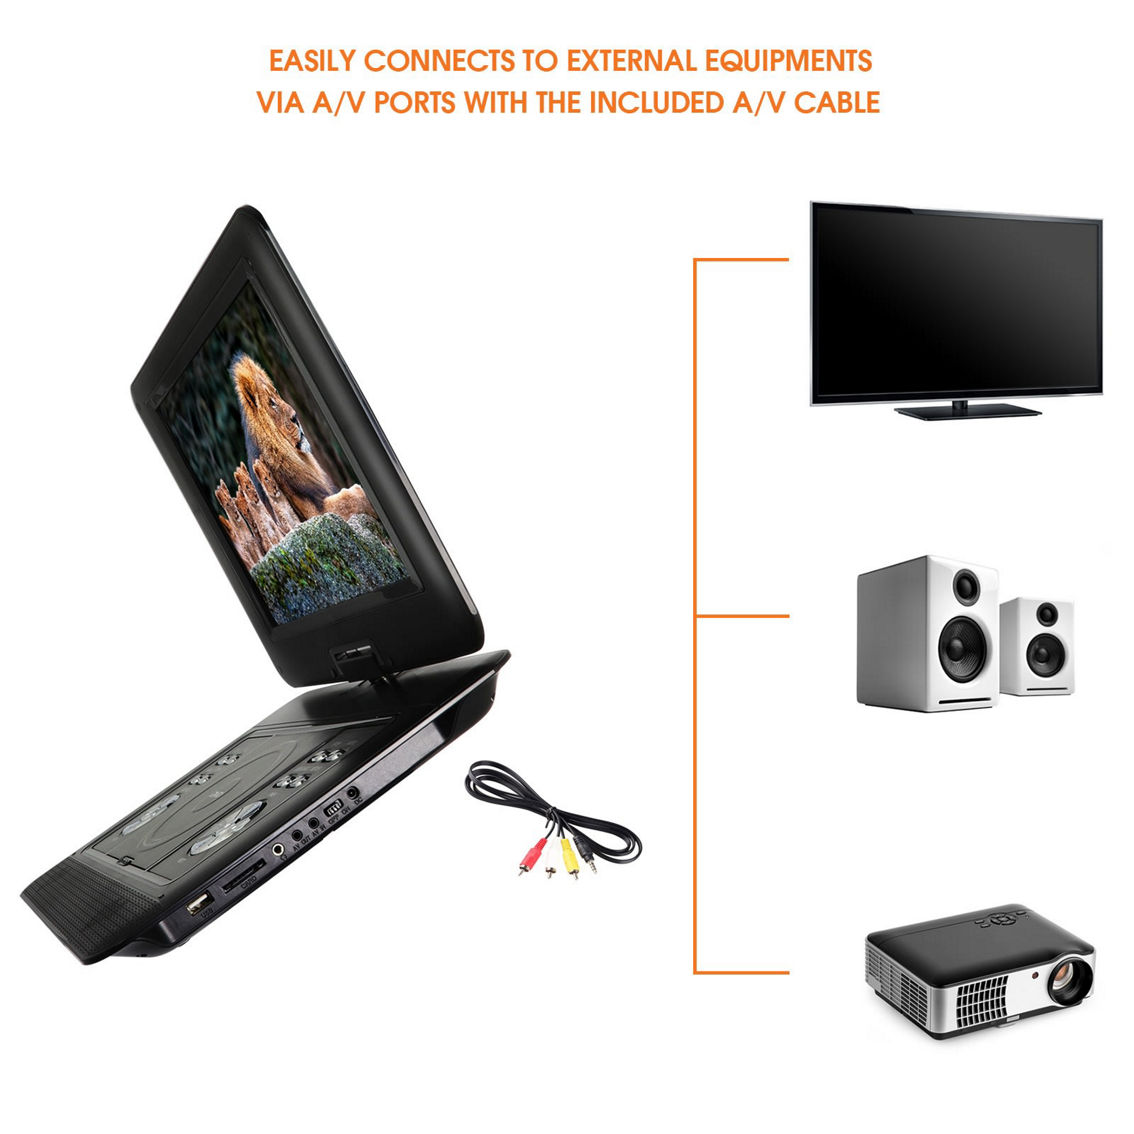 Trexonic 13.3 Inch Portable TV+DVD Player with Color TFT LED Screen and USB/HD/A - Image 5 of 5